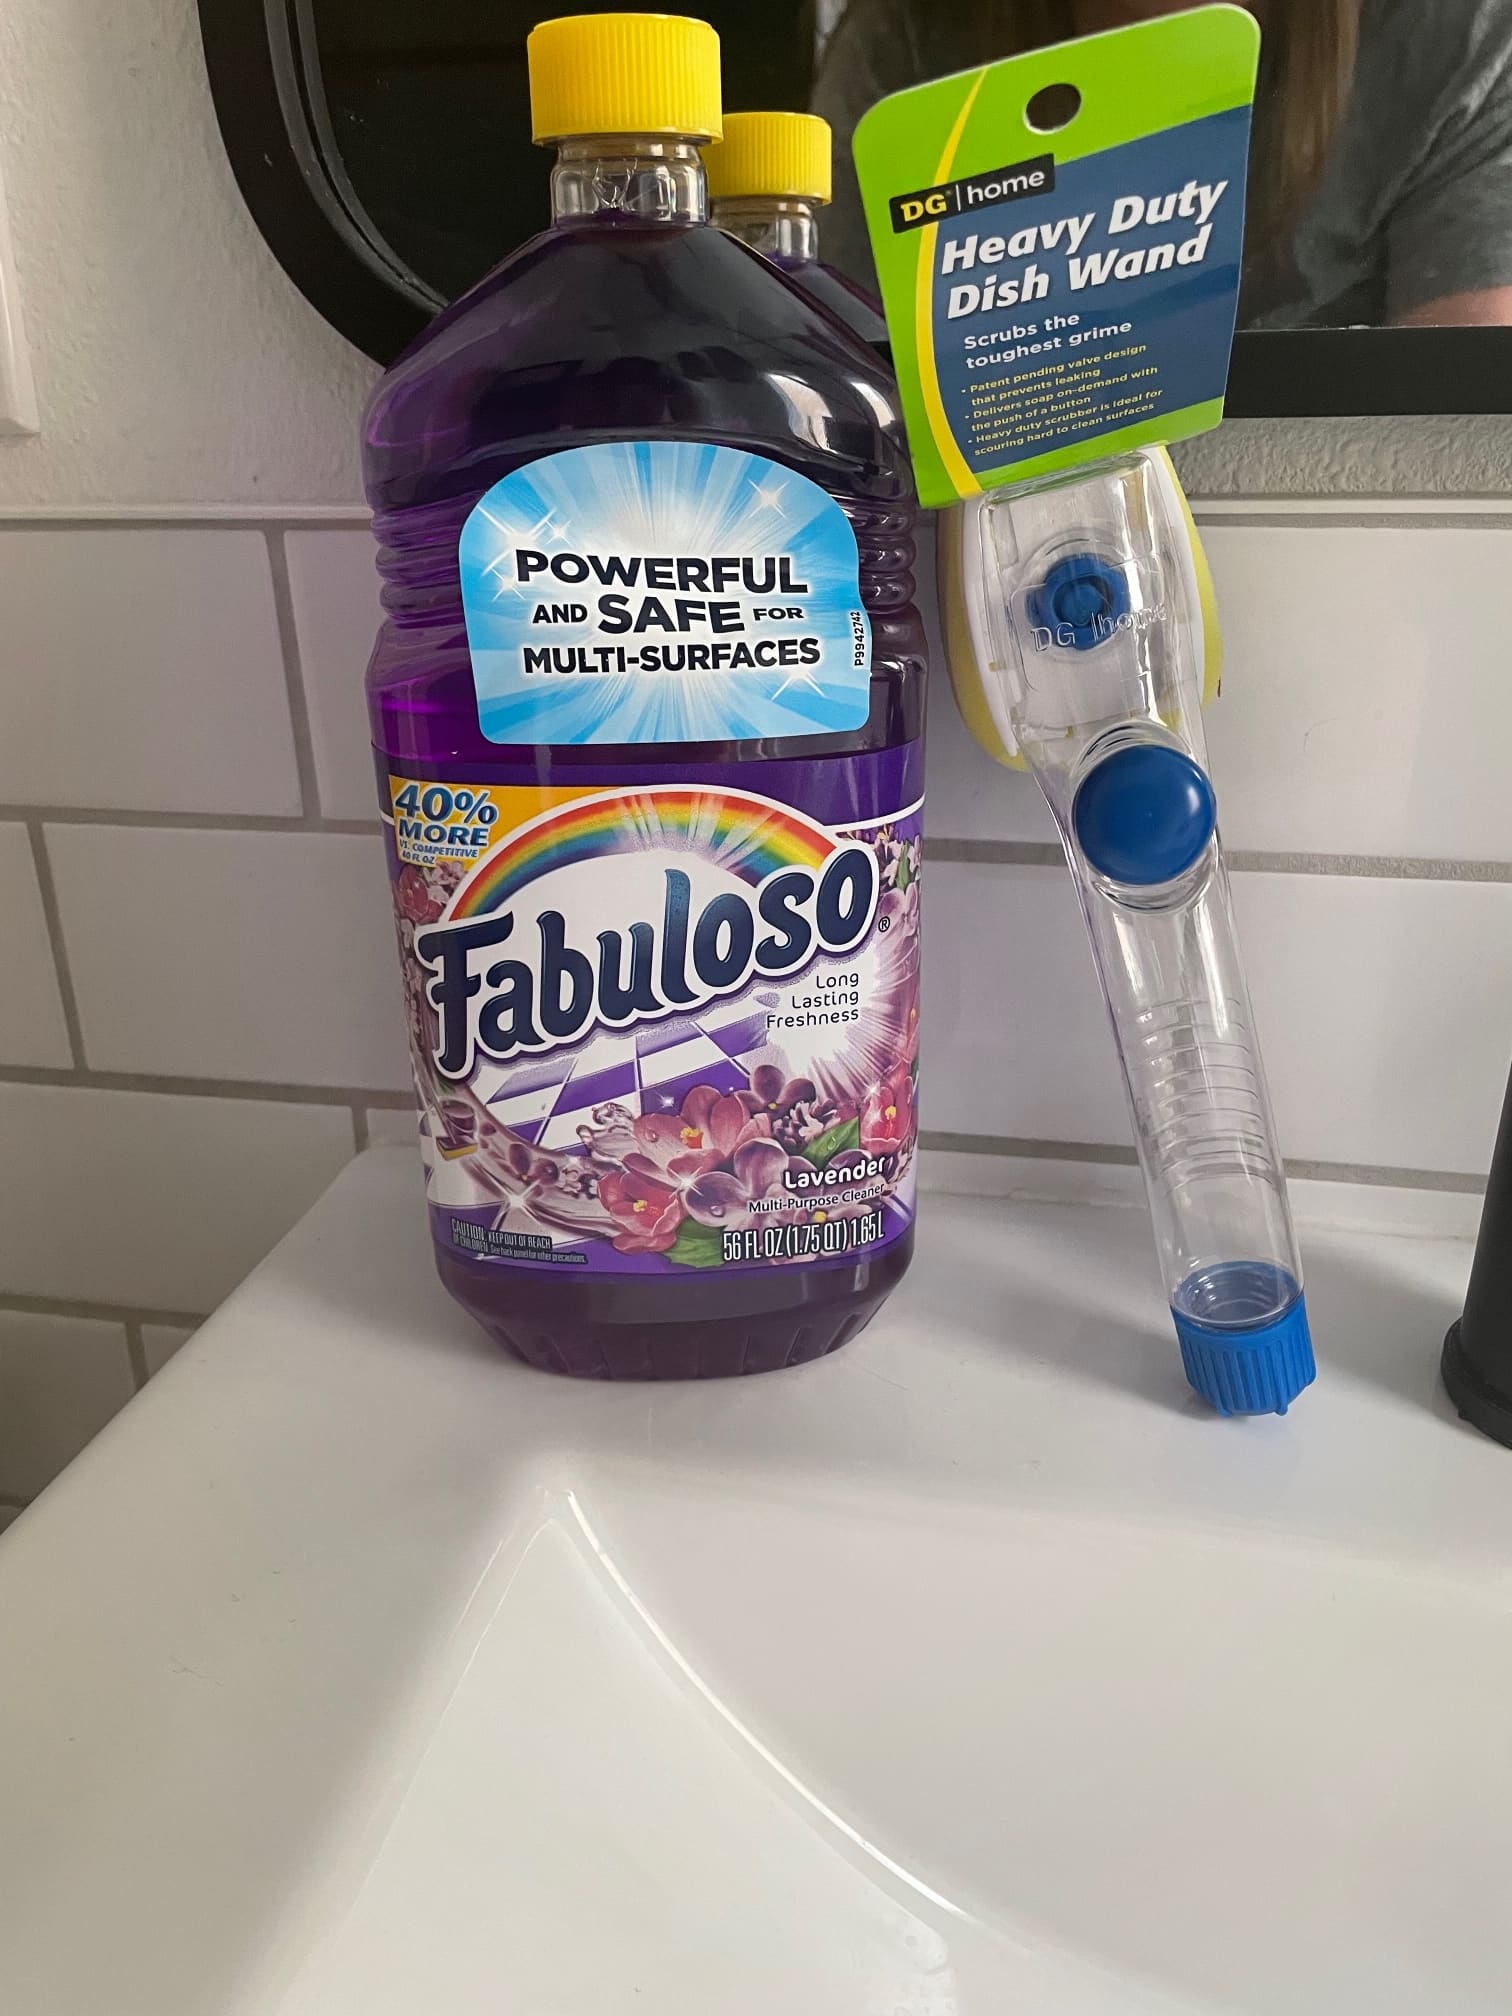 Here's how to *REALLY* use the Miracle Shower Cleaner! (Dollar